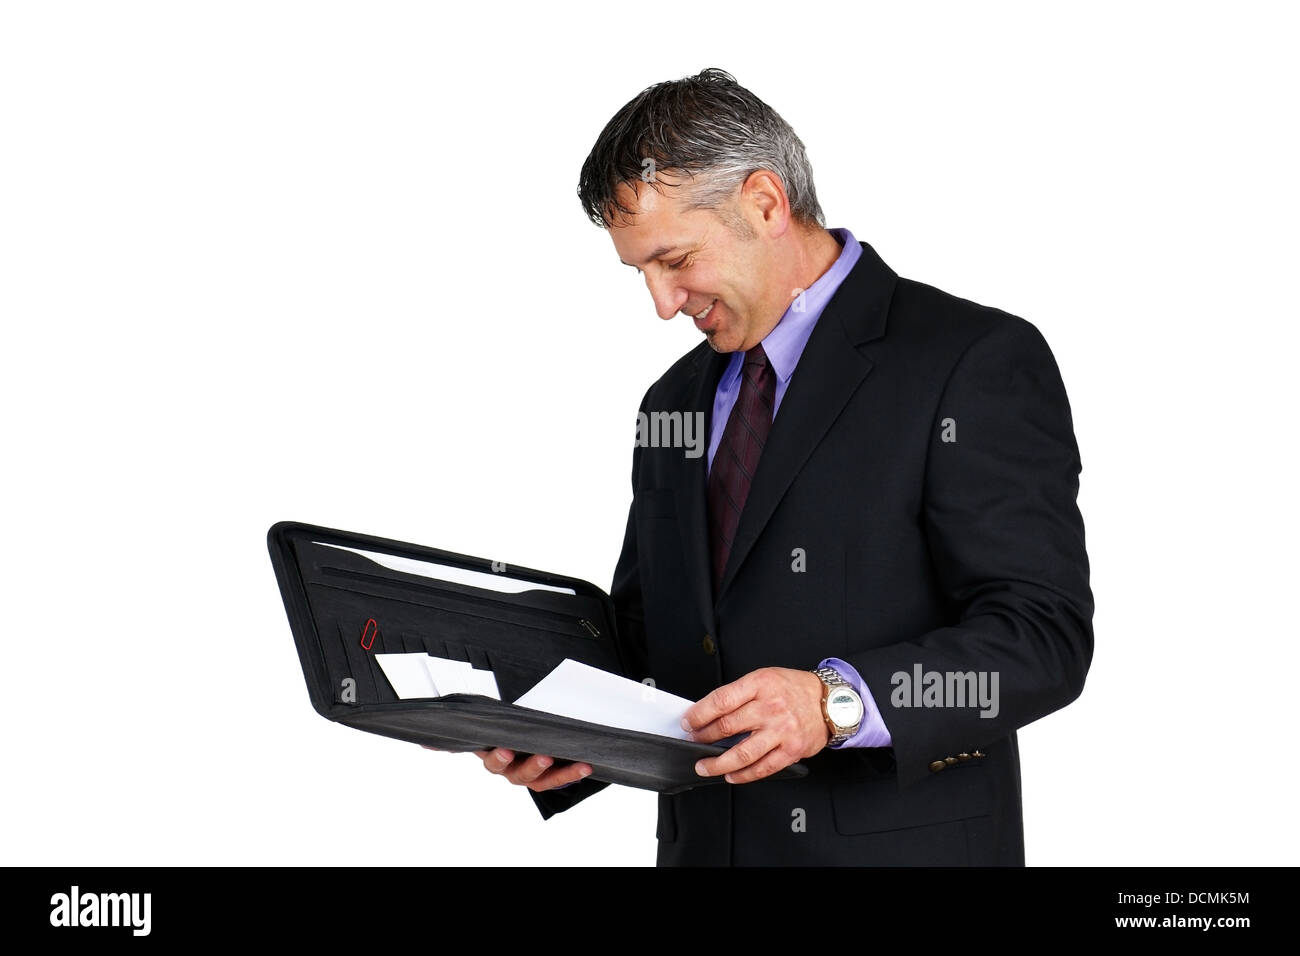 Boss or manager looking at paperwork Stock Photo